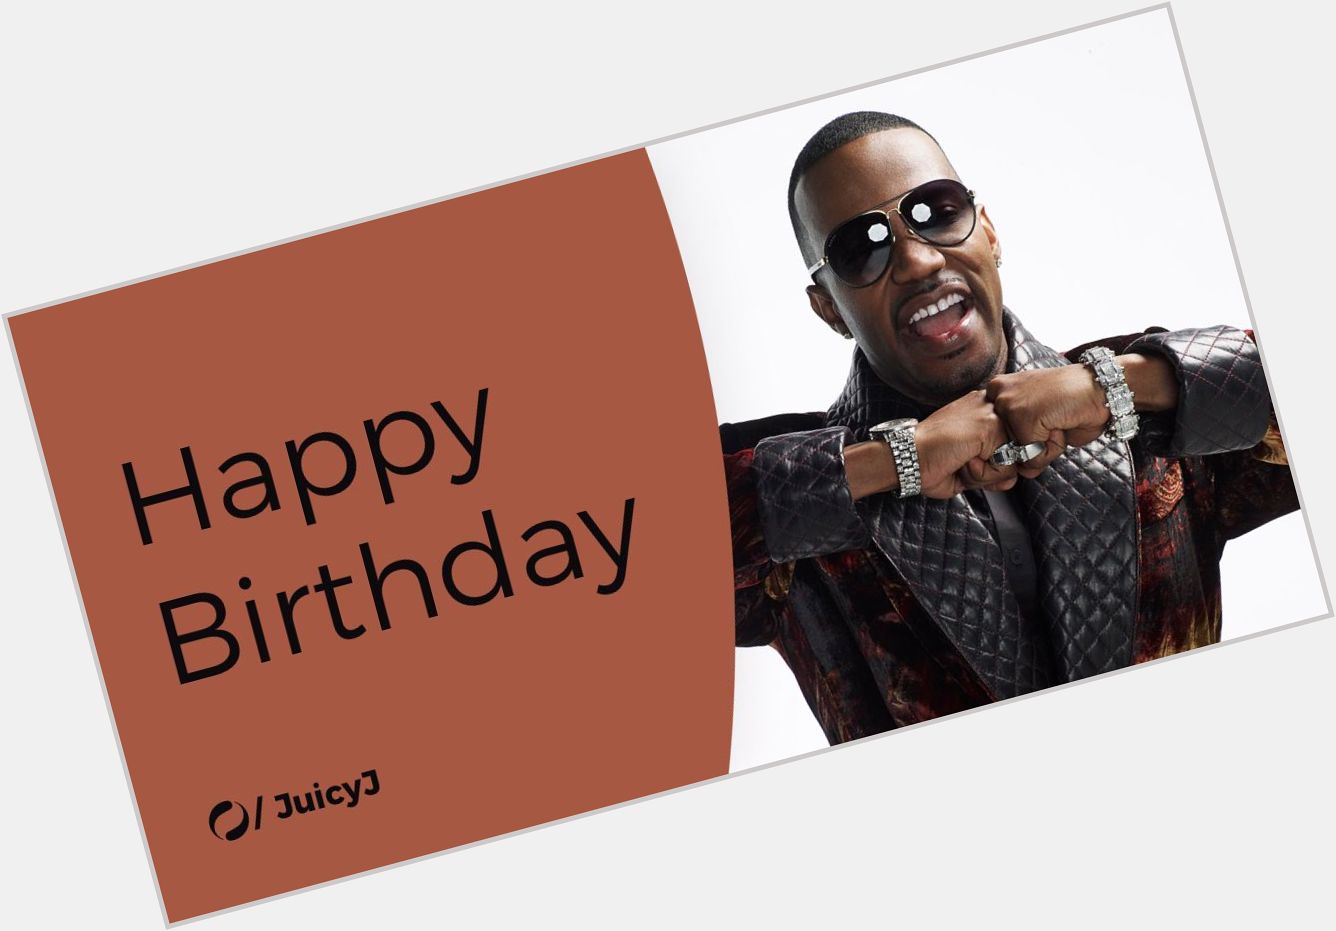 Today is Juicy J\s birthday! Everyone join us in wishing him a happy birthday!  